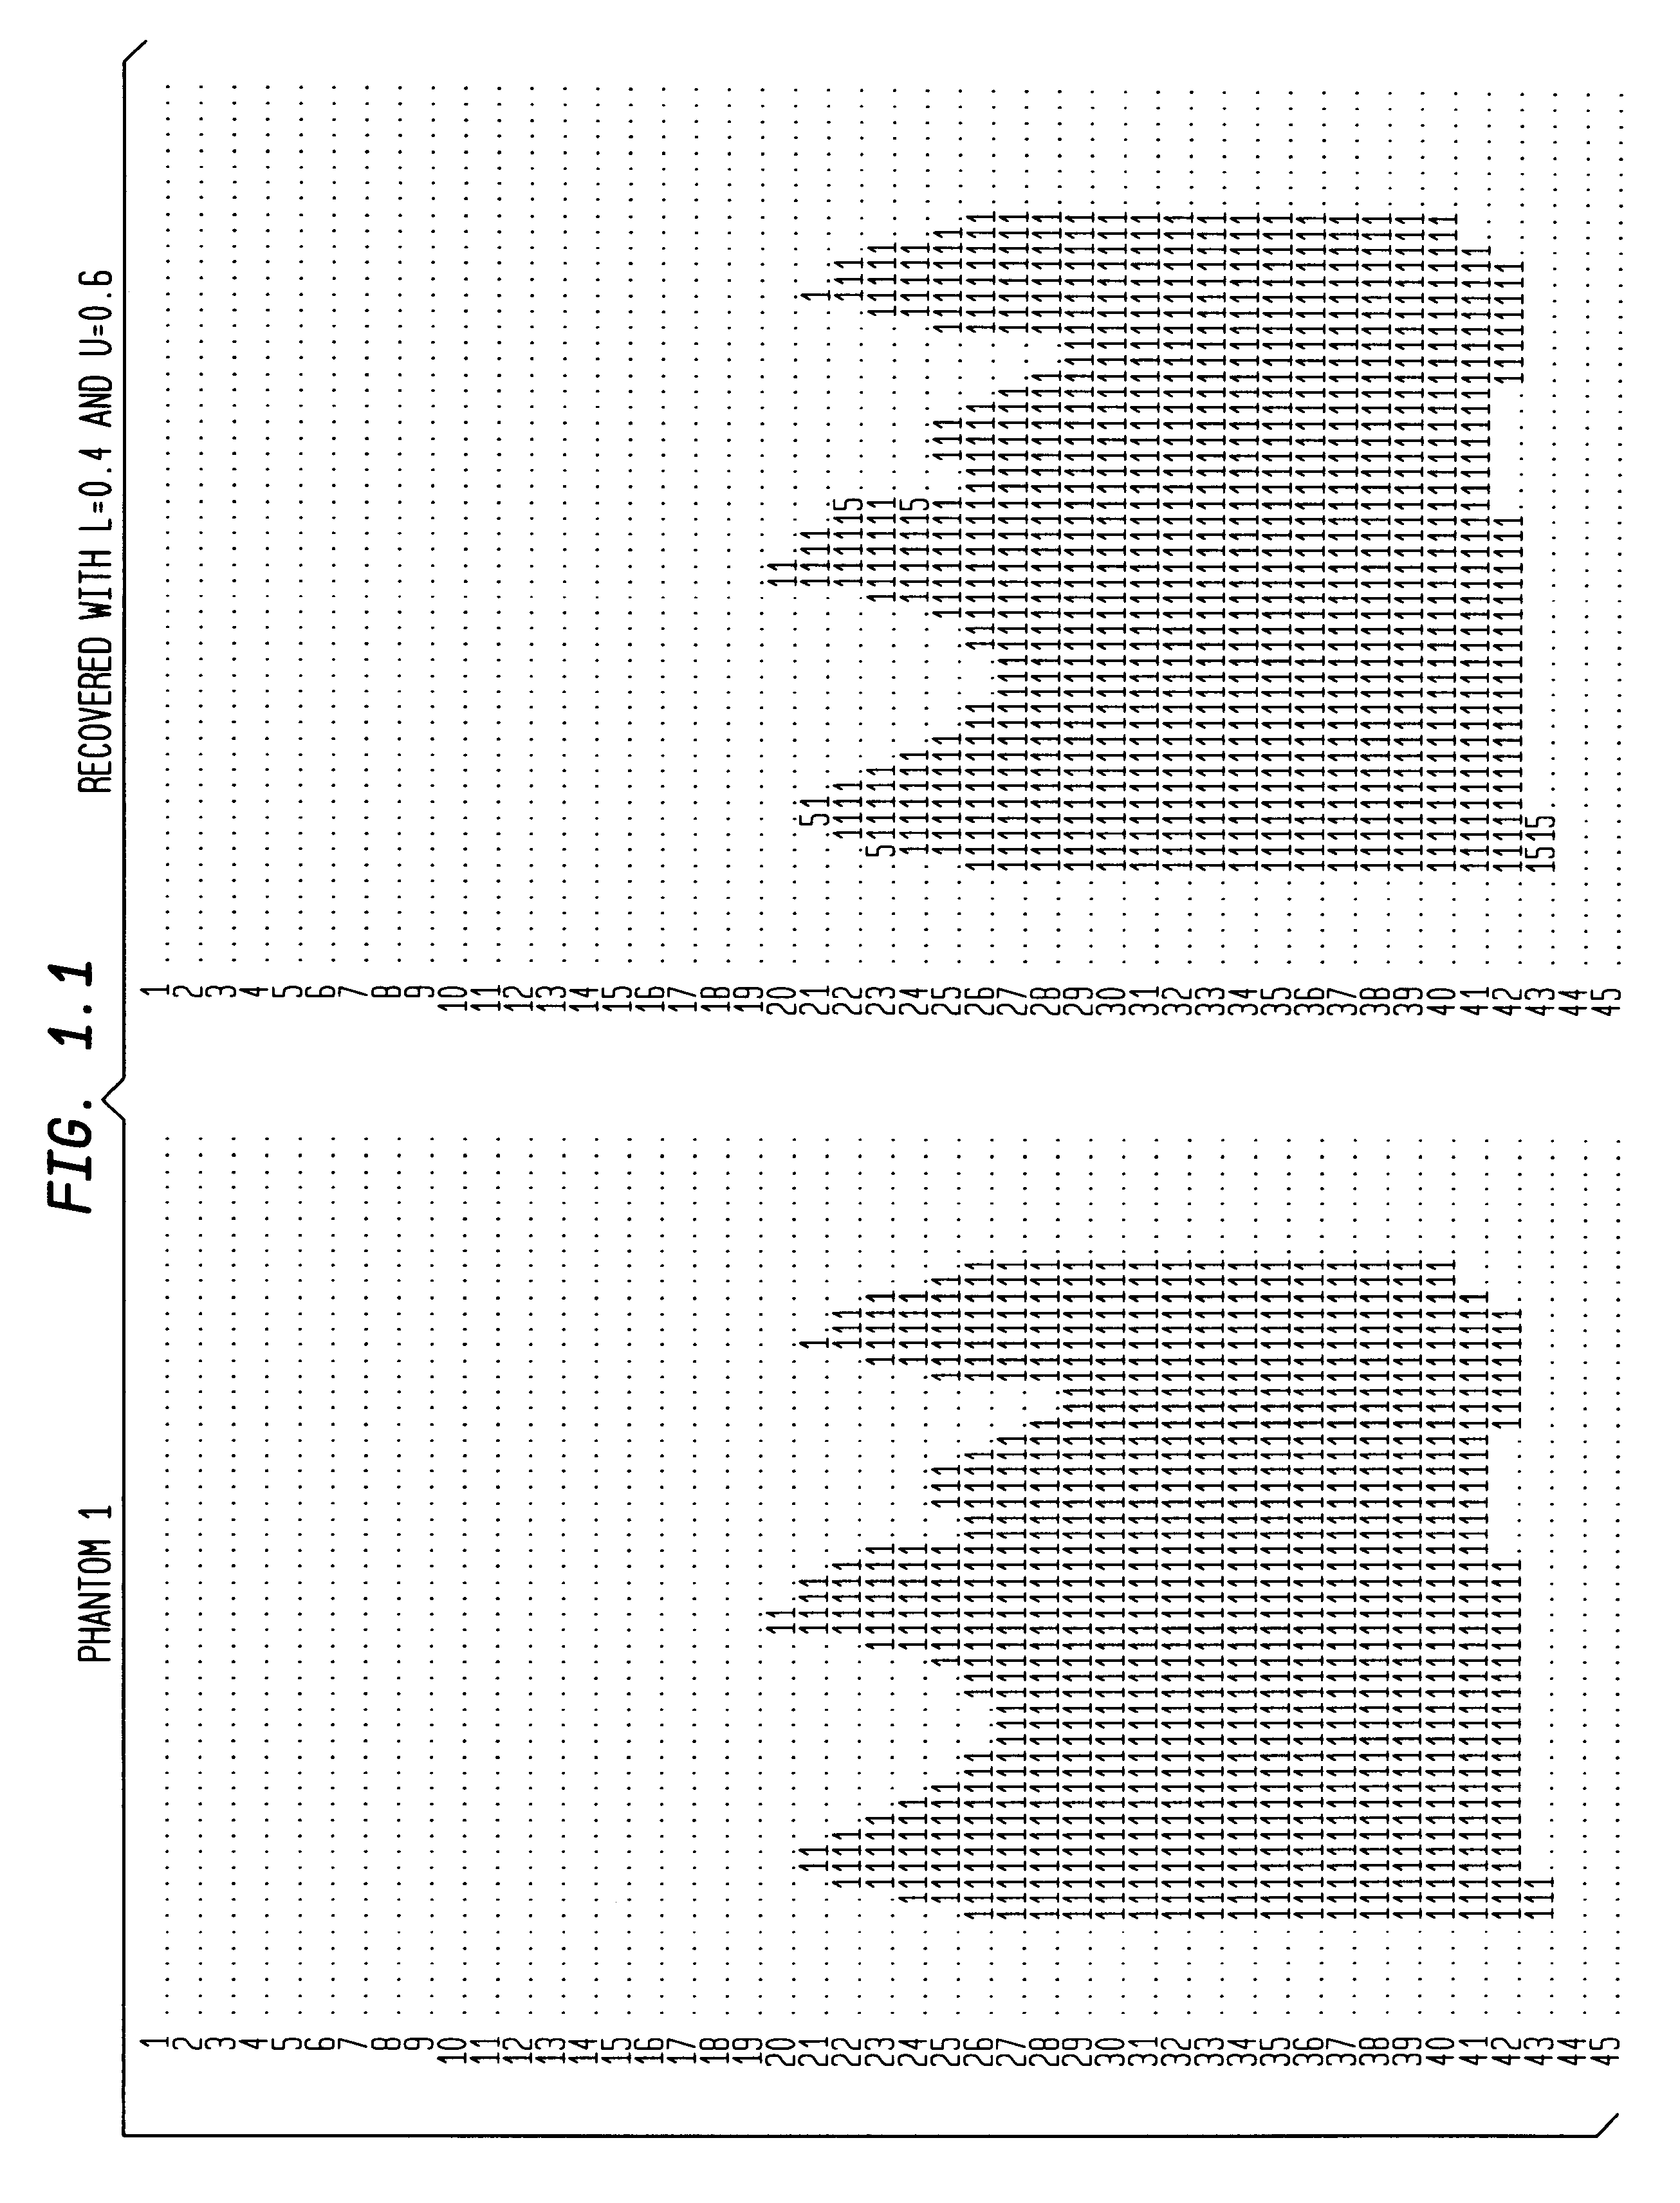 Method and apparatus for discrete tomography